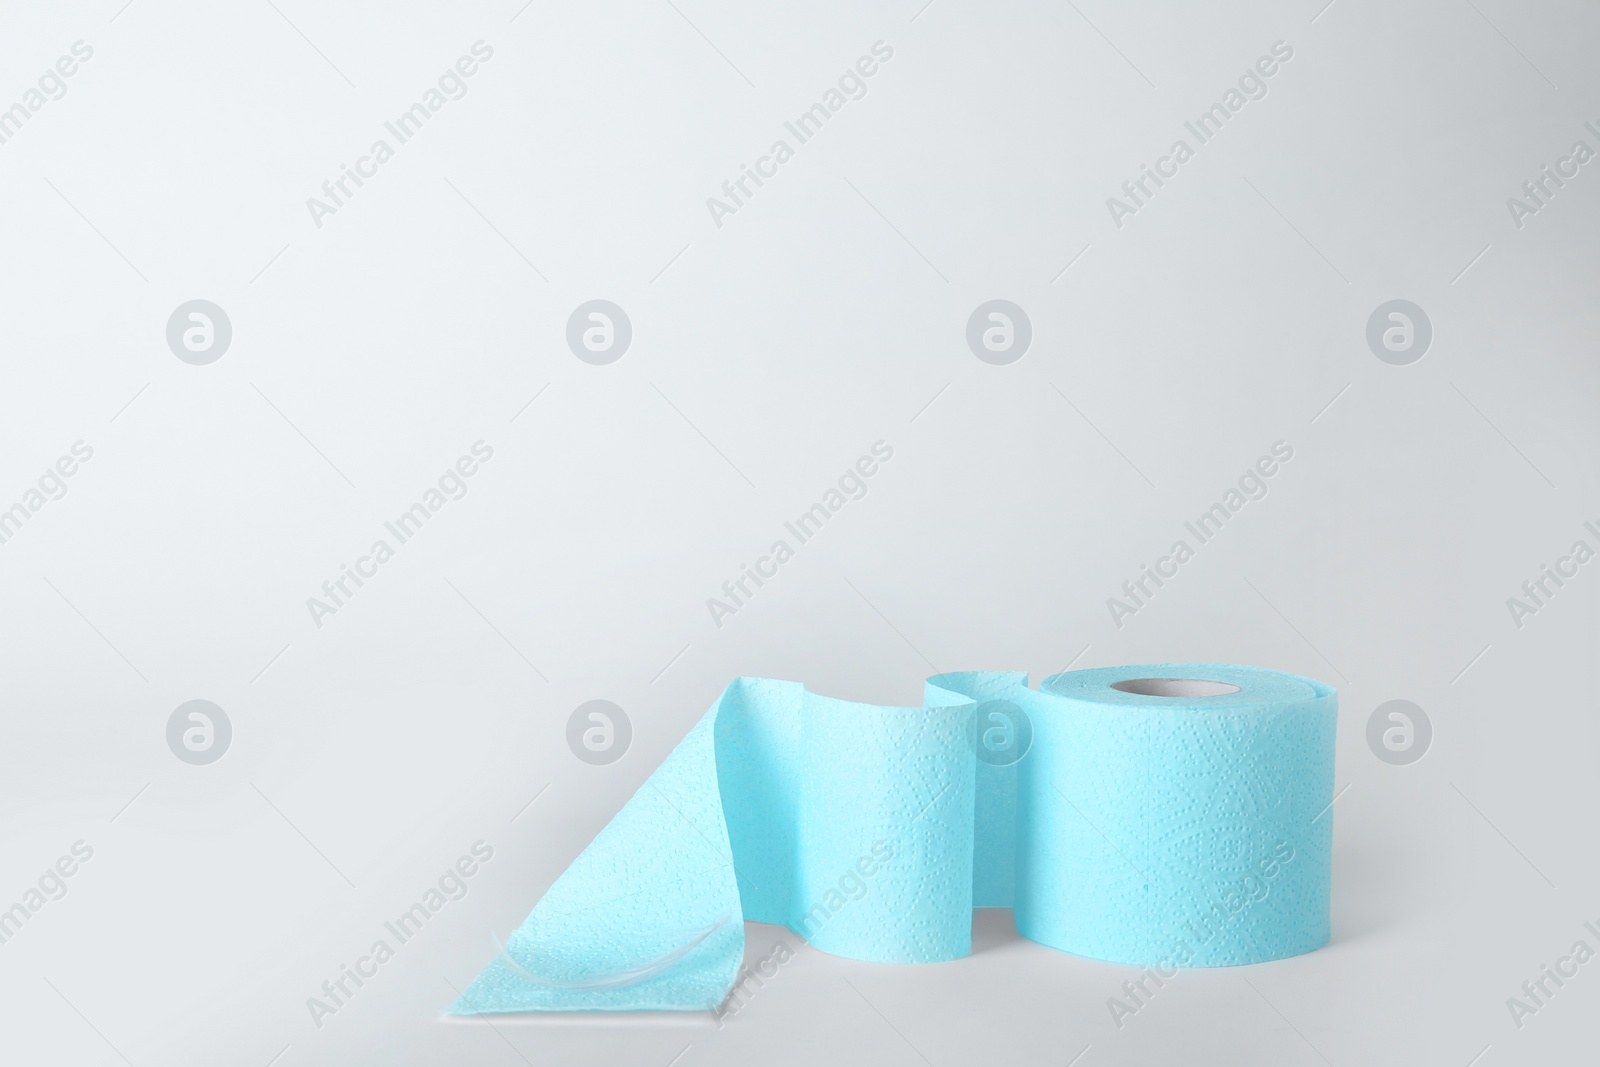 Photo of Roll of toilet paper on white background. Space for text